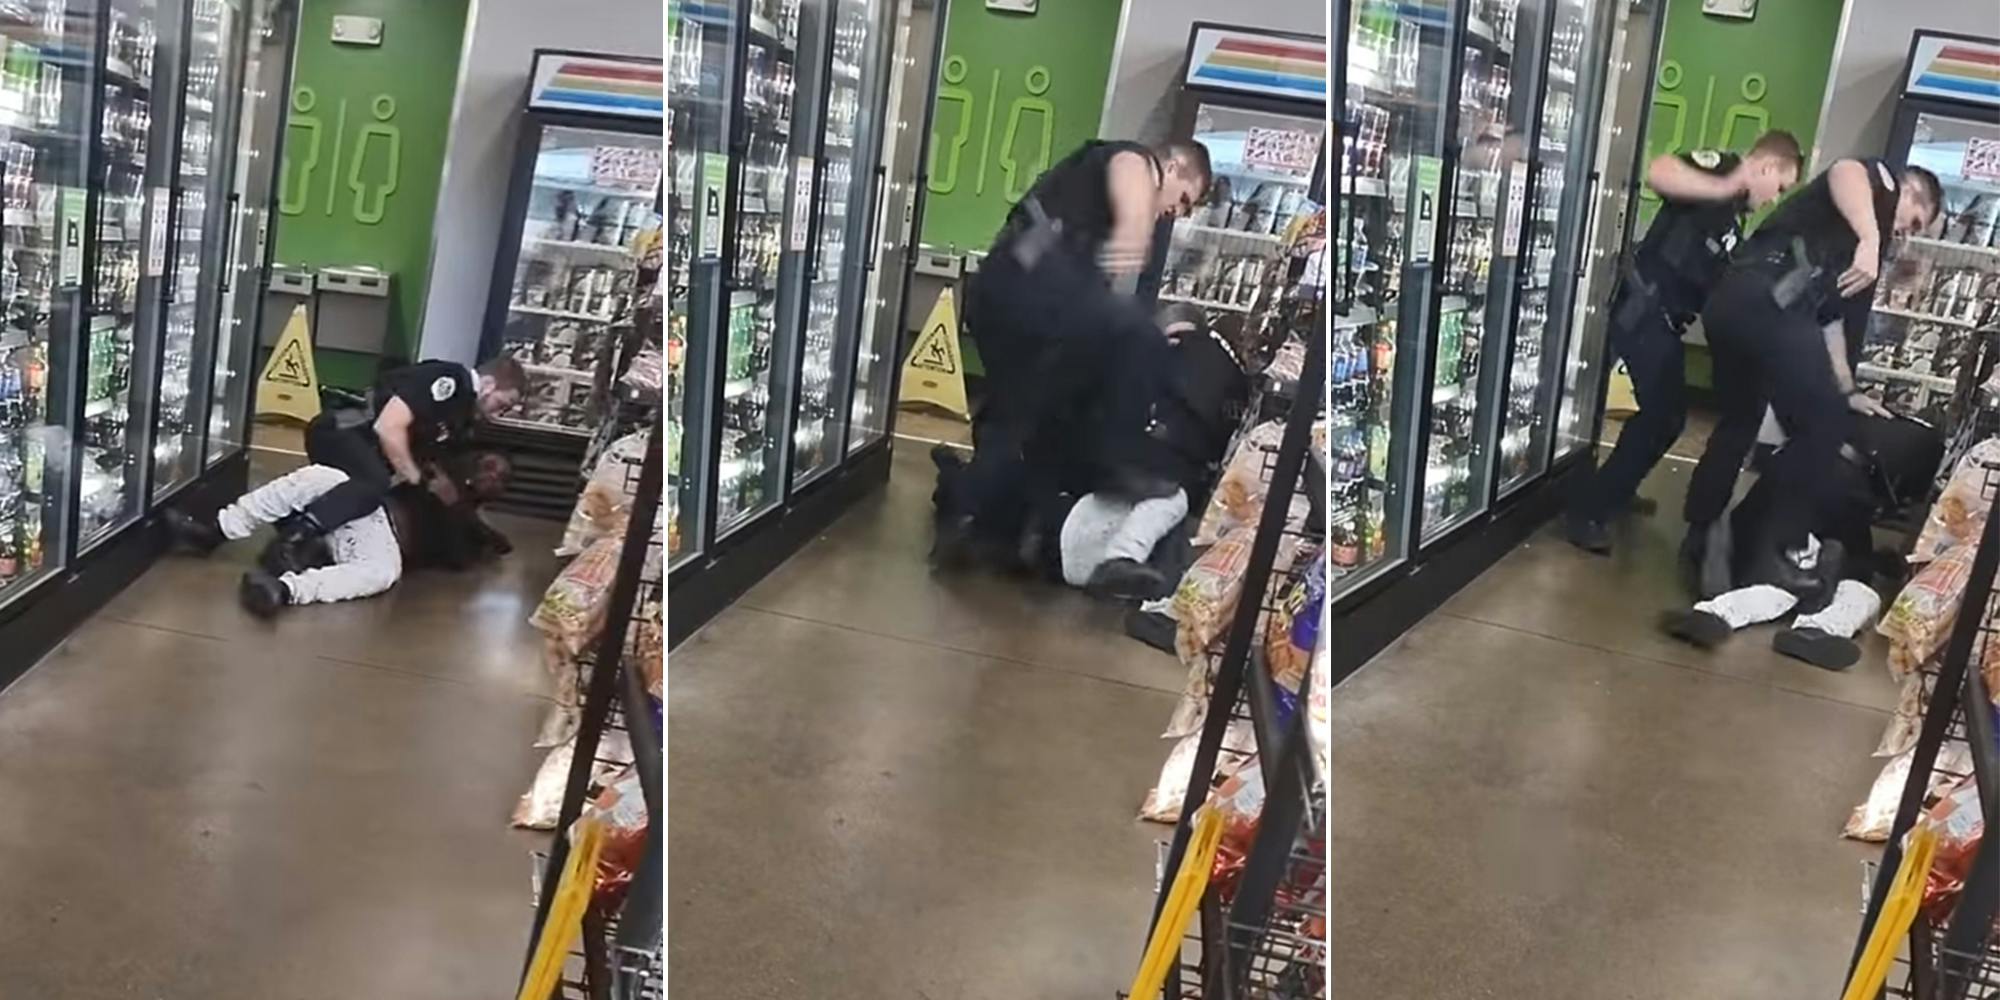 one police officer on top of man in store (l) police officer stomping on man's knee (c) multiple officers surround man, one stomping knee